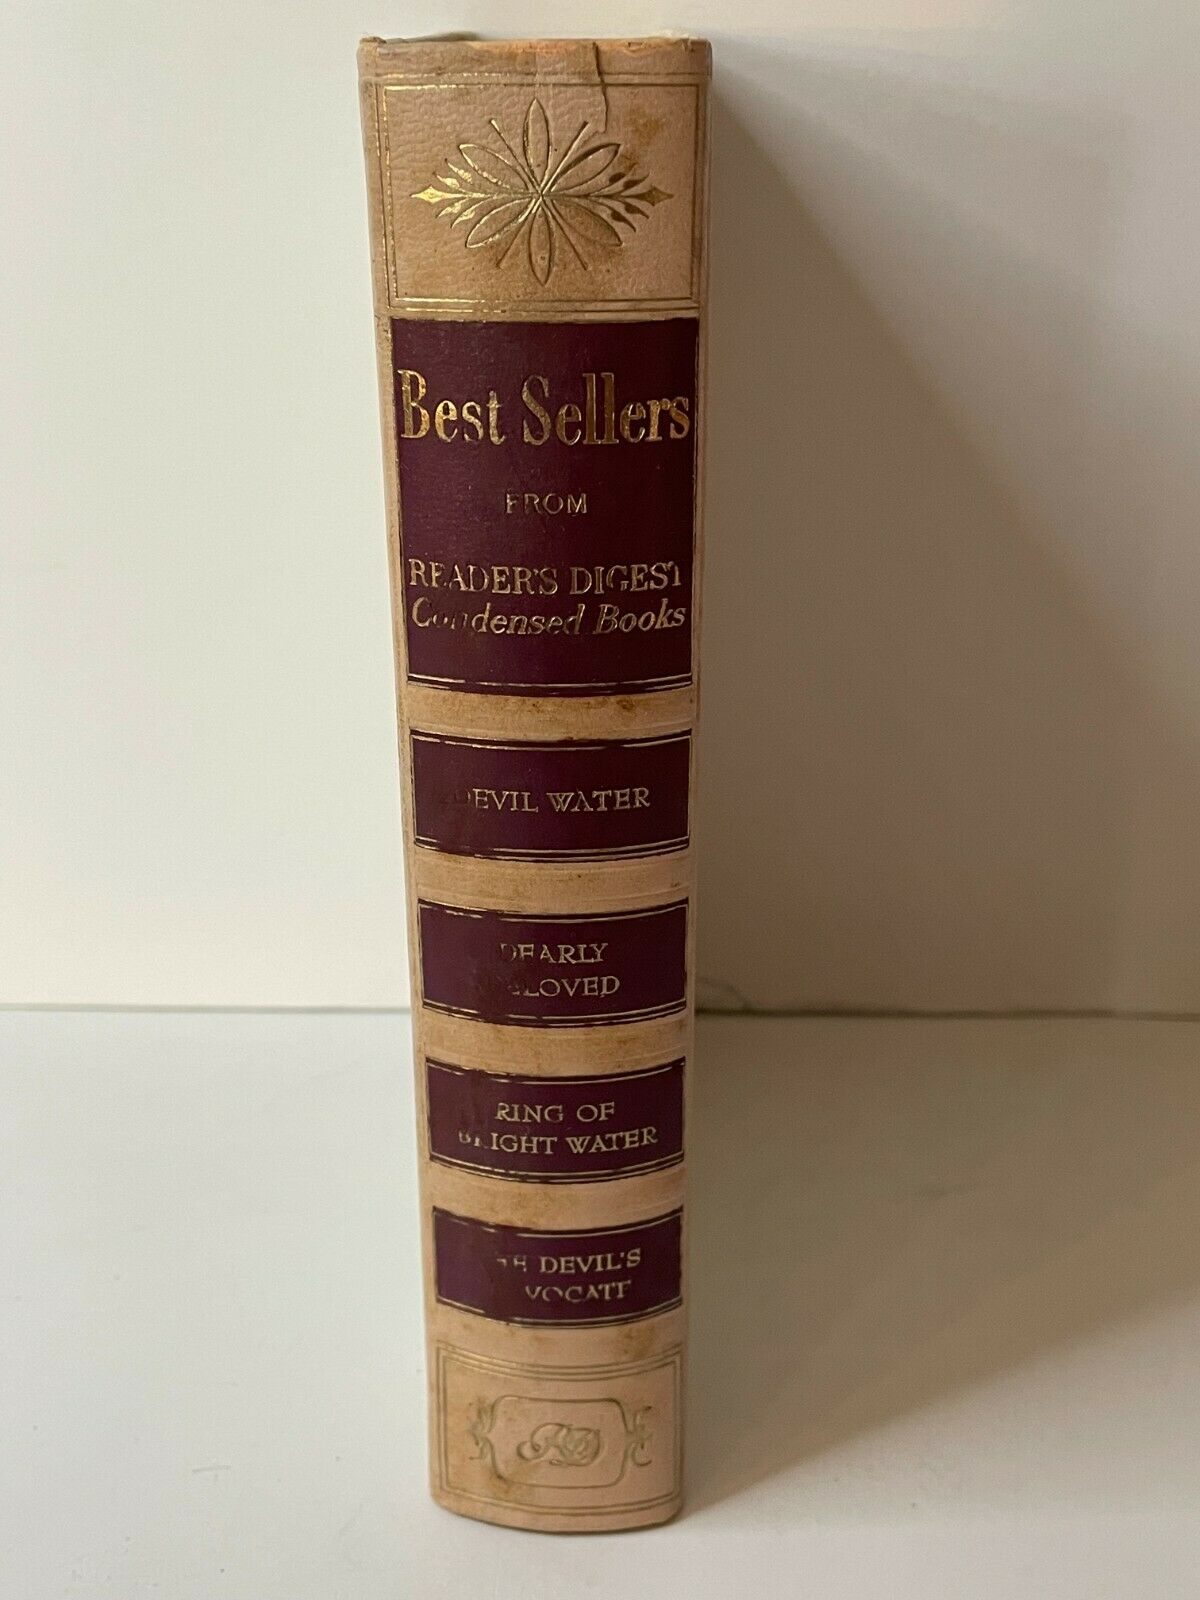 Best Sellers from Reader’s Digest Condensed Books. 1962. First Edition